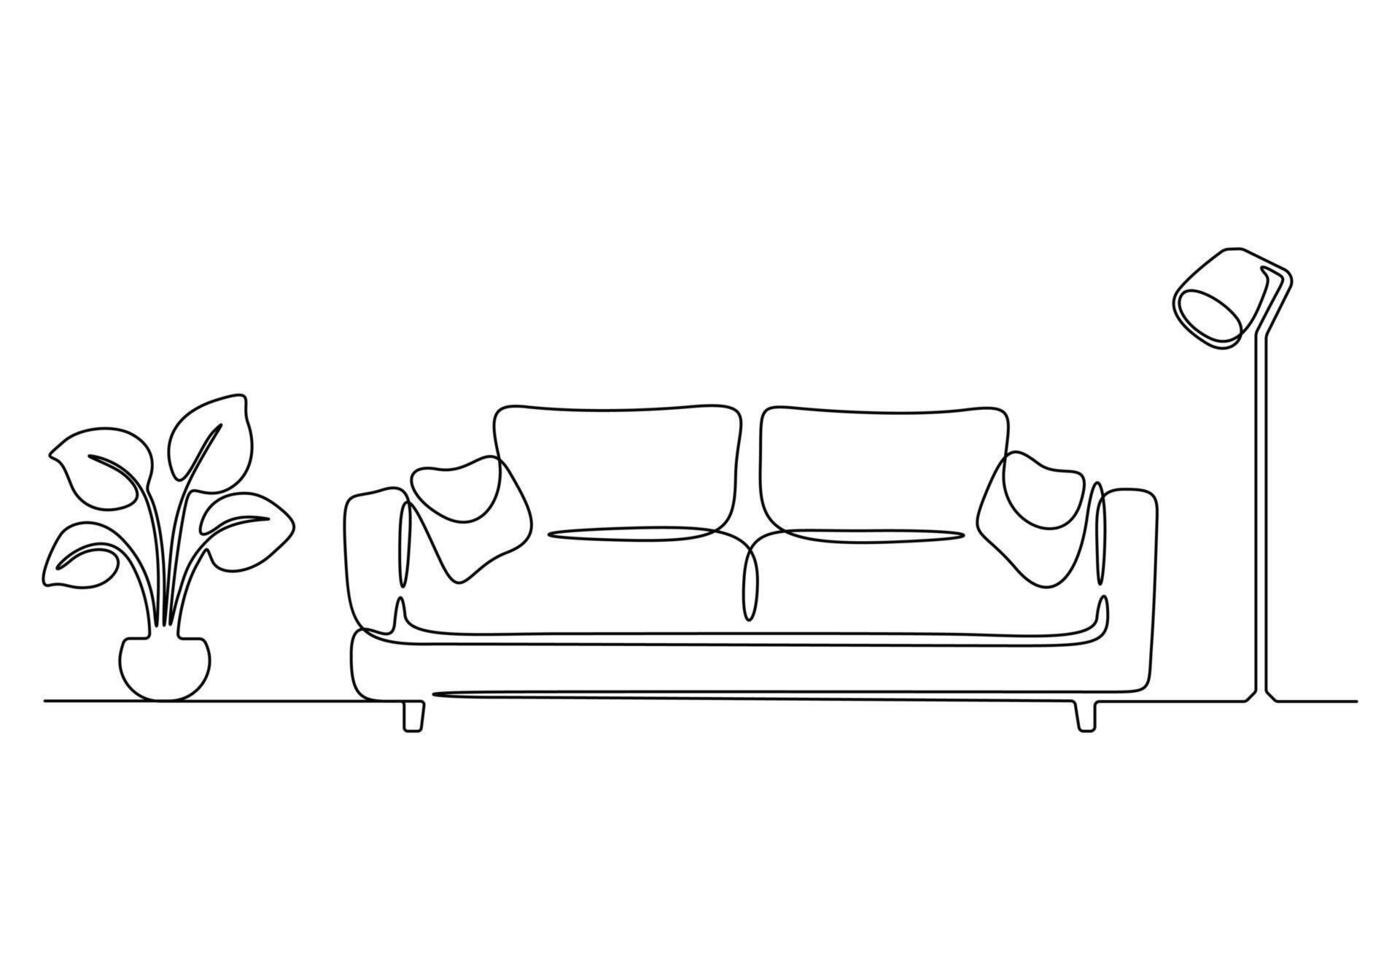 Continuous one line drawing of couch or sofa with lamp and potted plant. Modern furniture simple linear style vector illustration